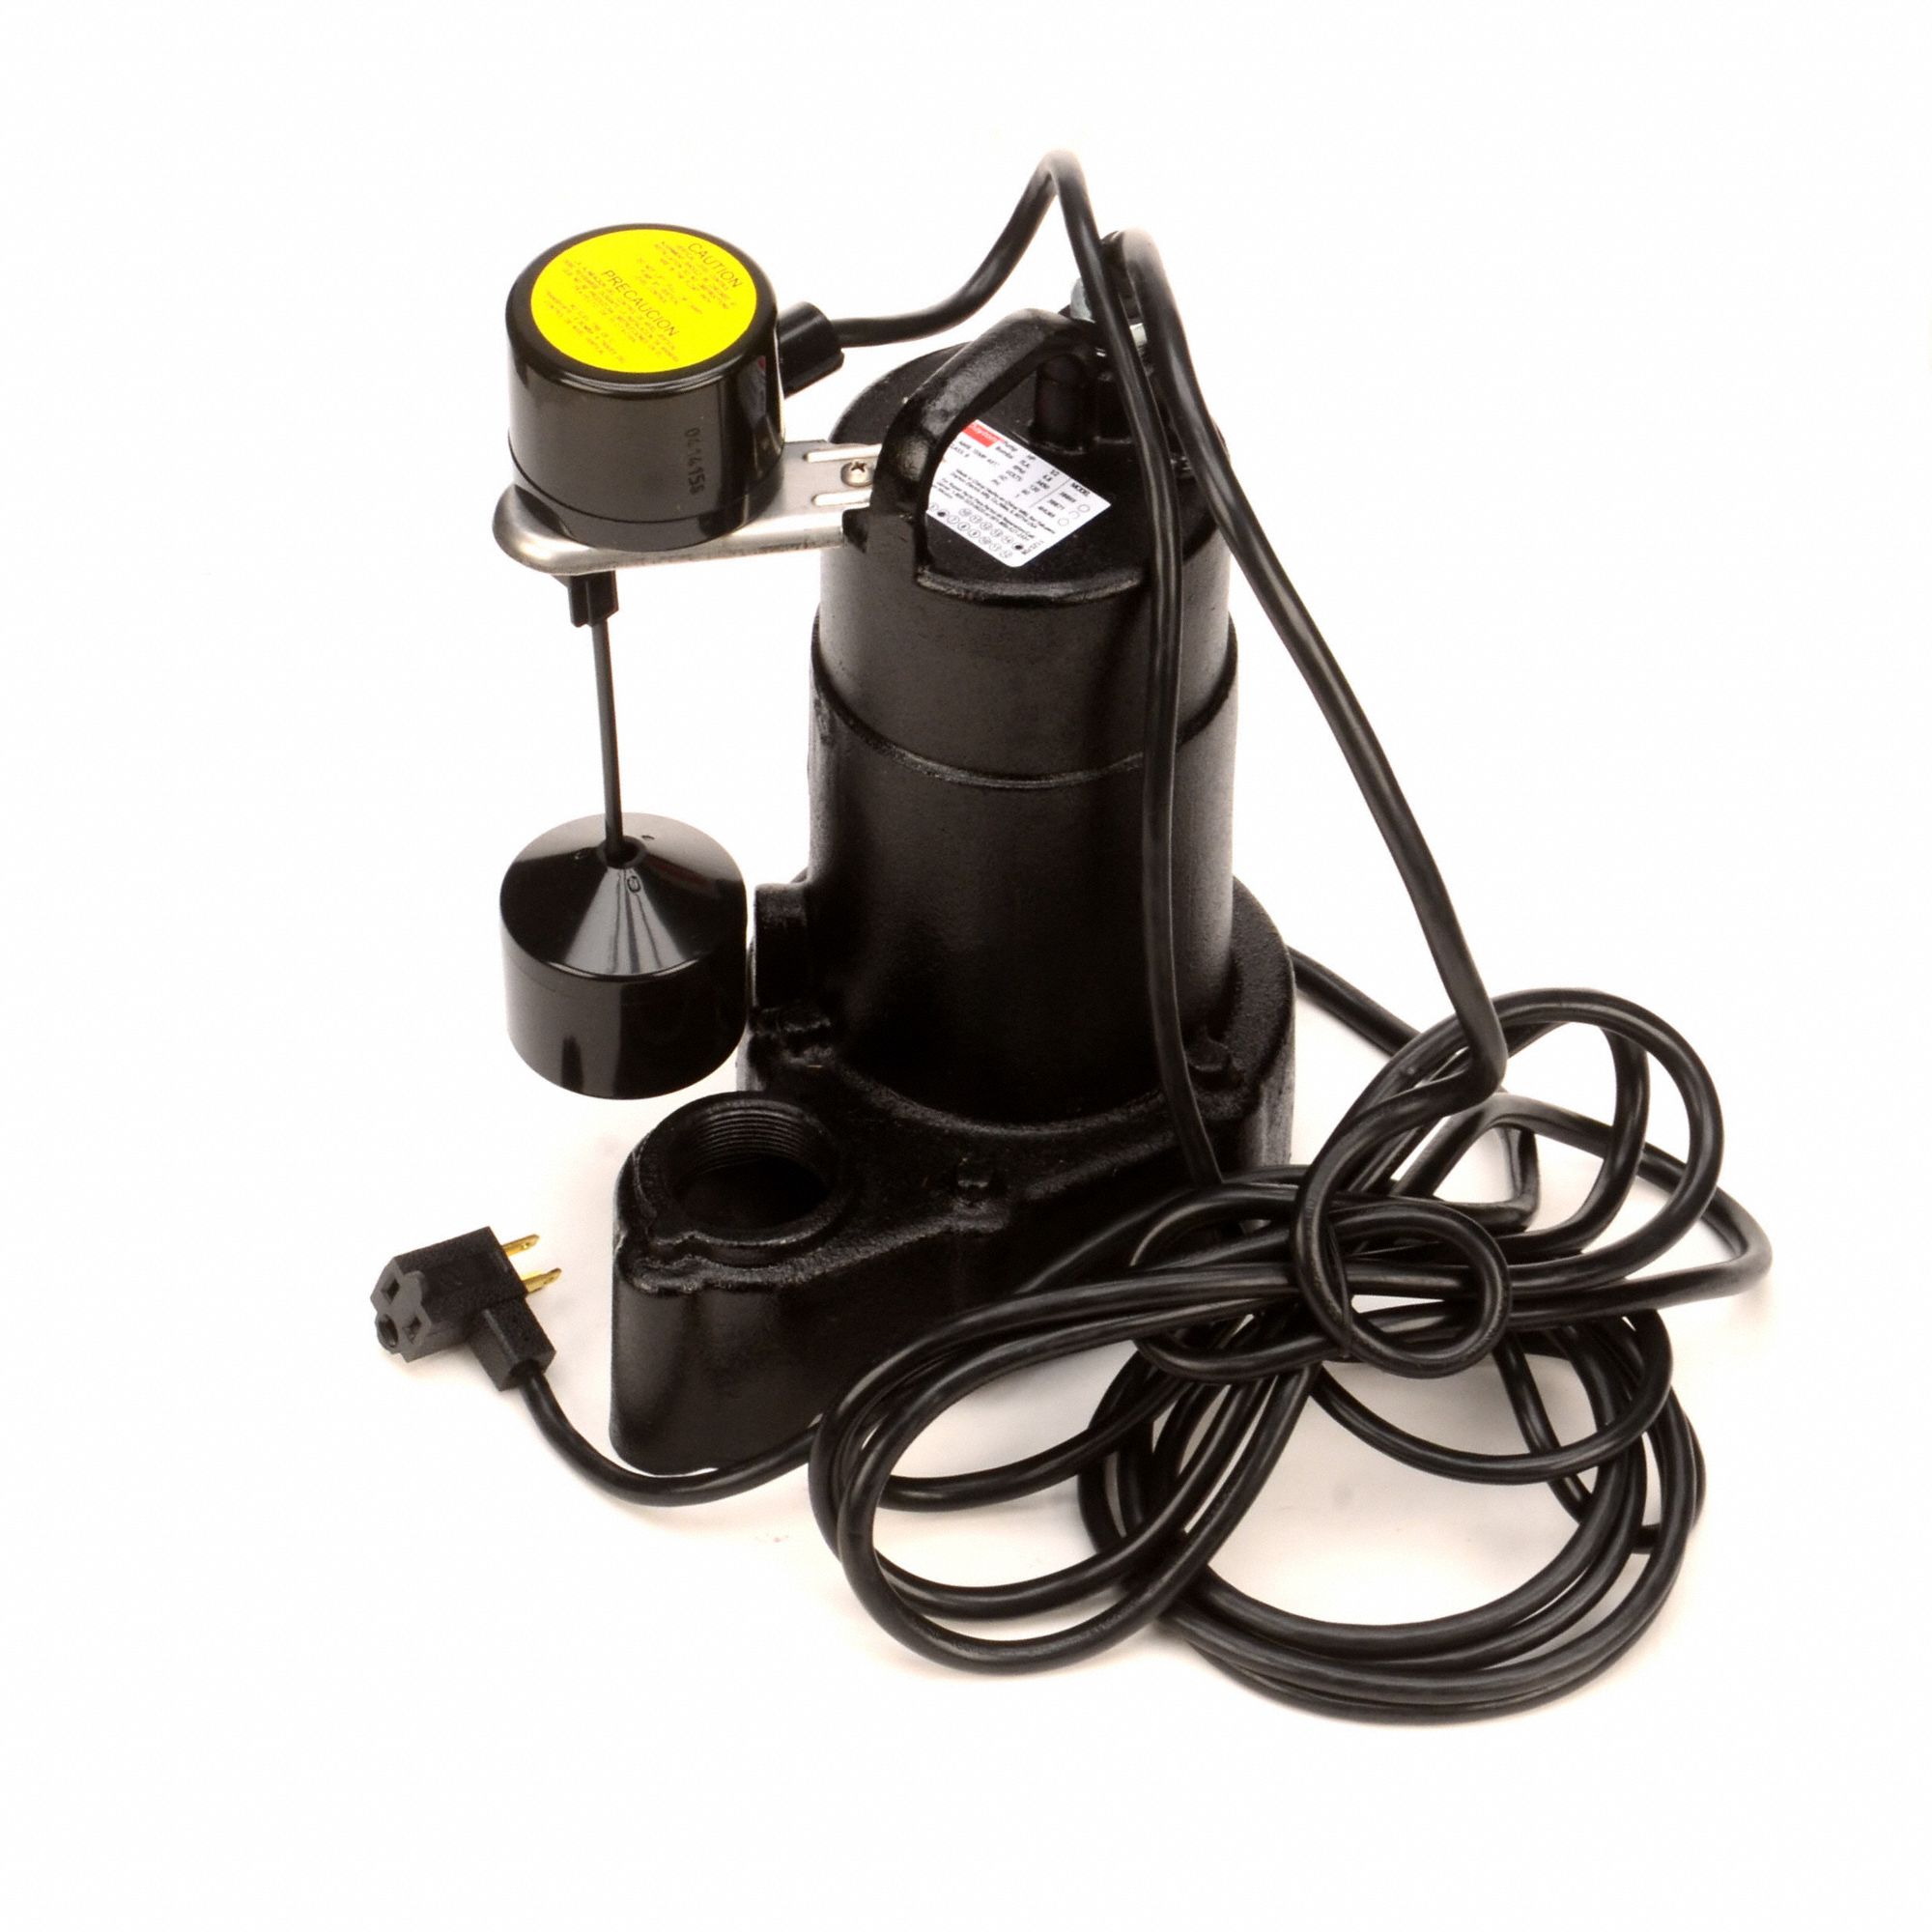 Types of Sump Pumps and How They Work - Grainger KnowHow